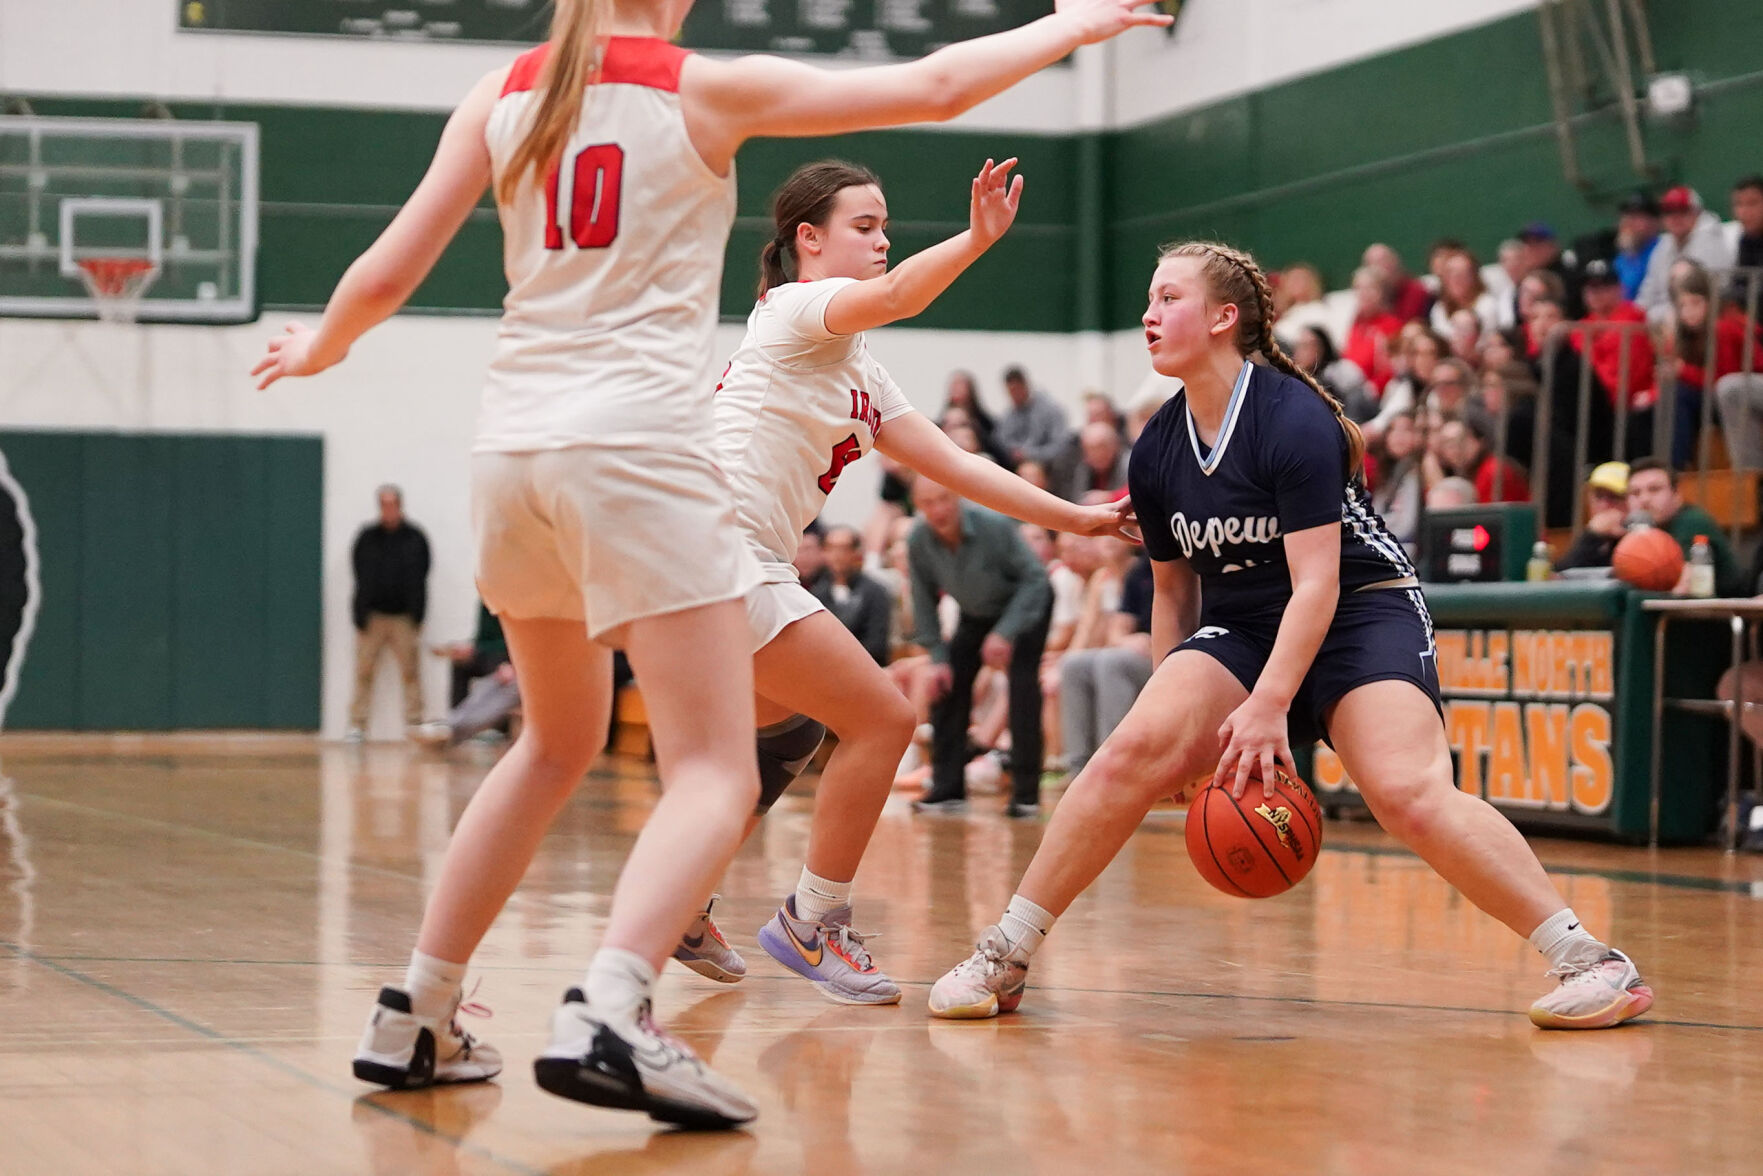 High school basketball: Amherst, Williamsville South, Lockport advance; player injuries and standout performances detailed